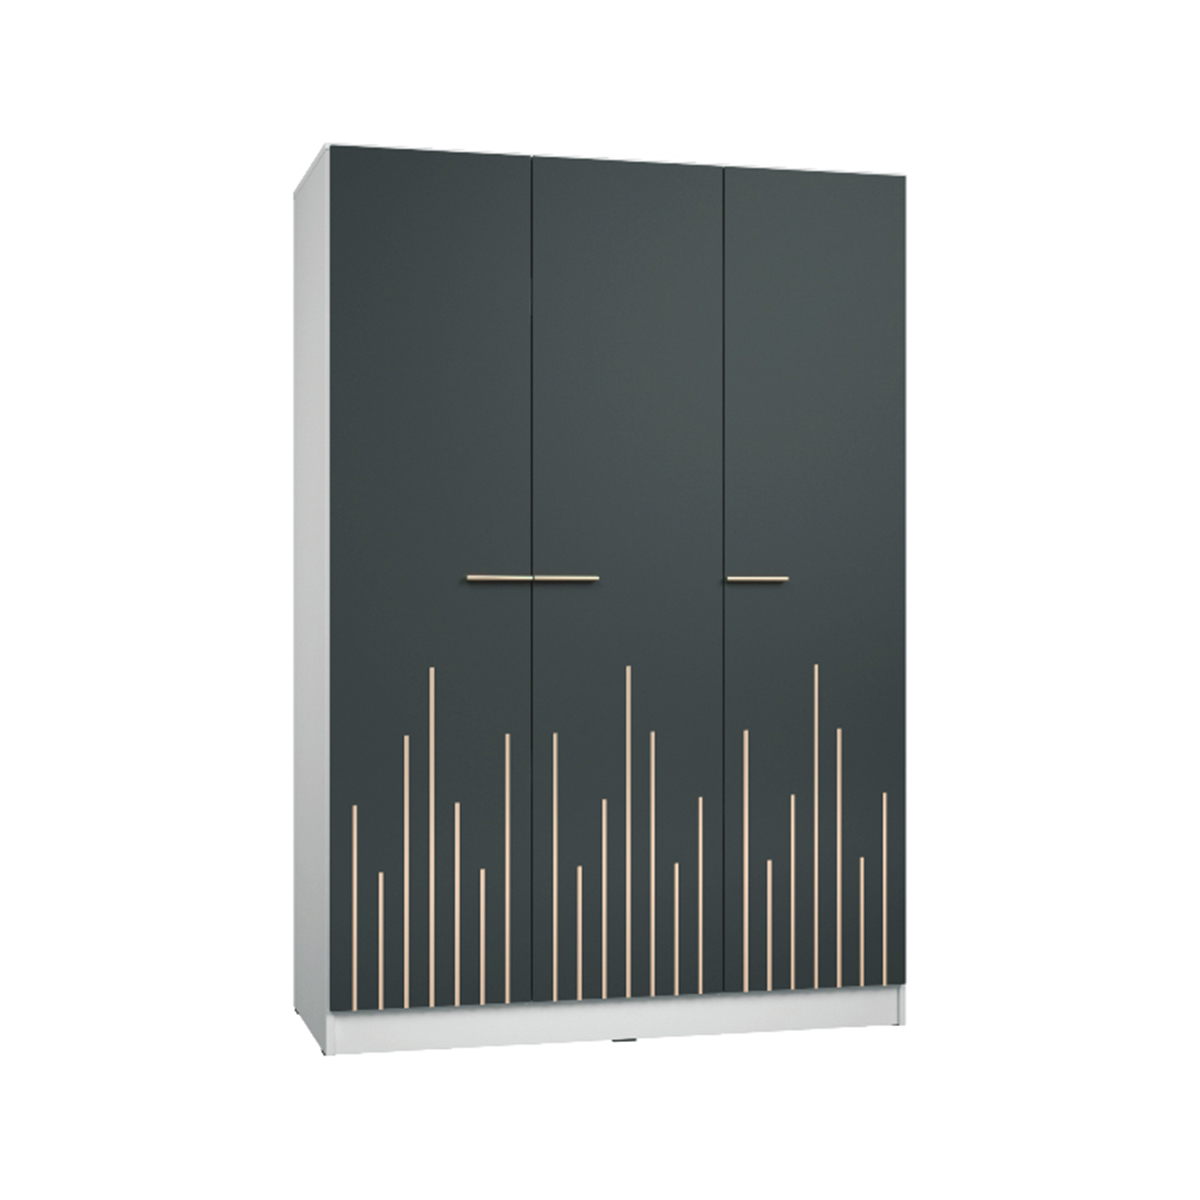 15069::XHB-745::A Sure wardrobe with 4 swing glass doors and 2 drawers. Dimension (WxDxH) cm : 163.8x62x220. Available in Oak SURE Wardrobes SURE Wardrobes